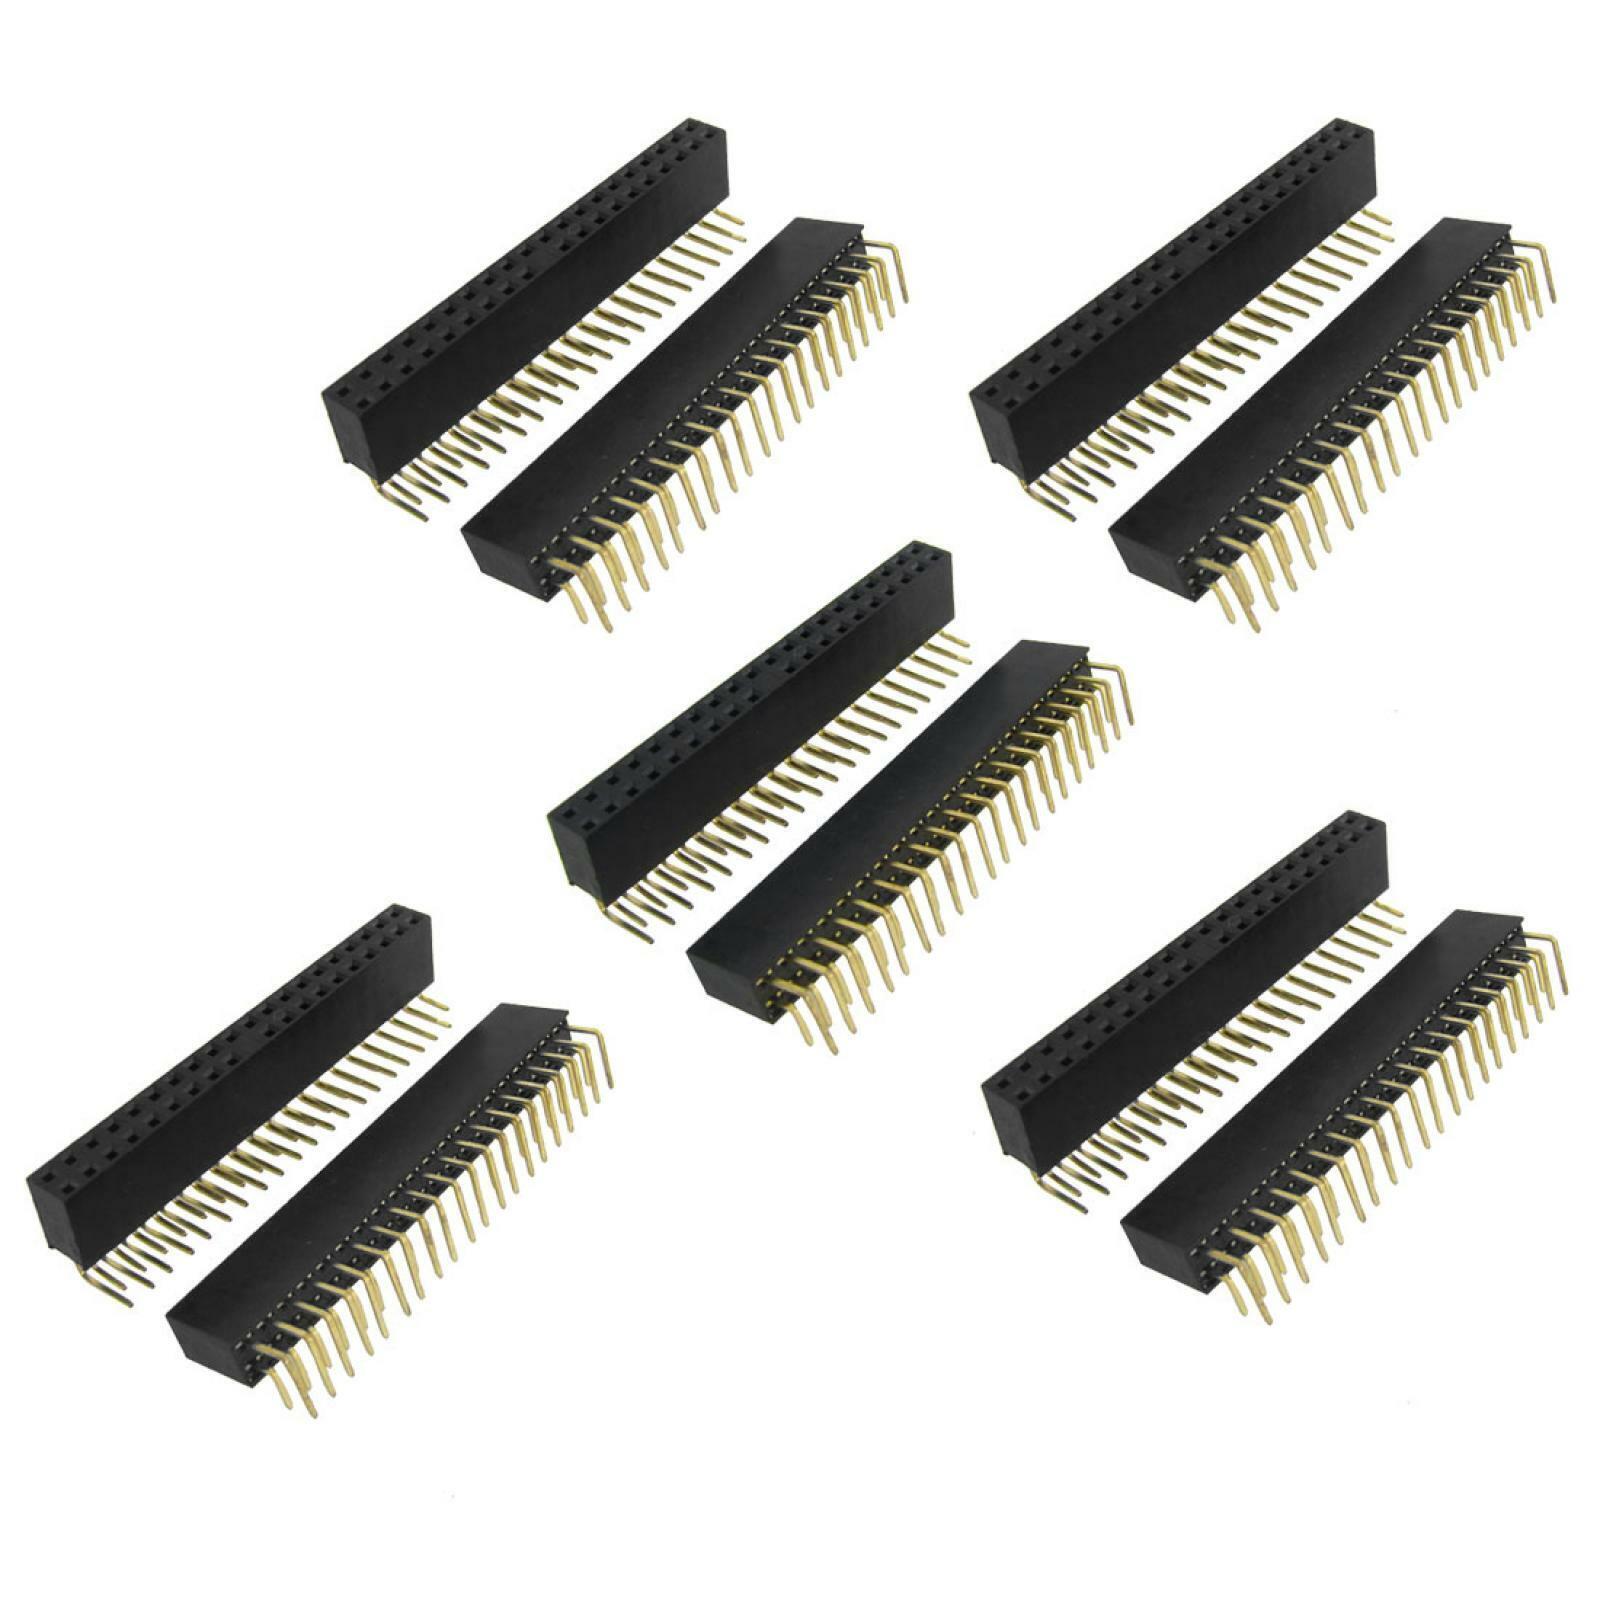 10 Pcs Double Rows 2.54mm Pitch 2x20 Pin Right Angle Female Pin Headers